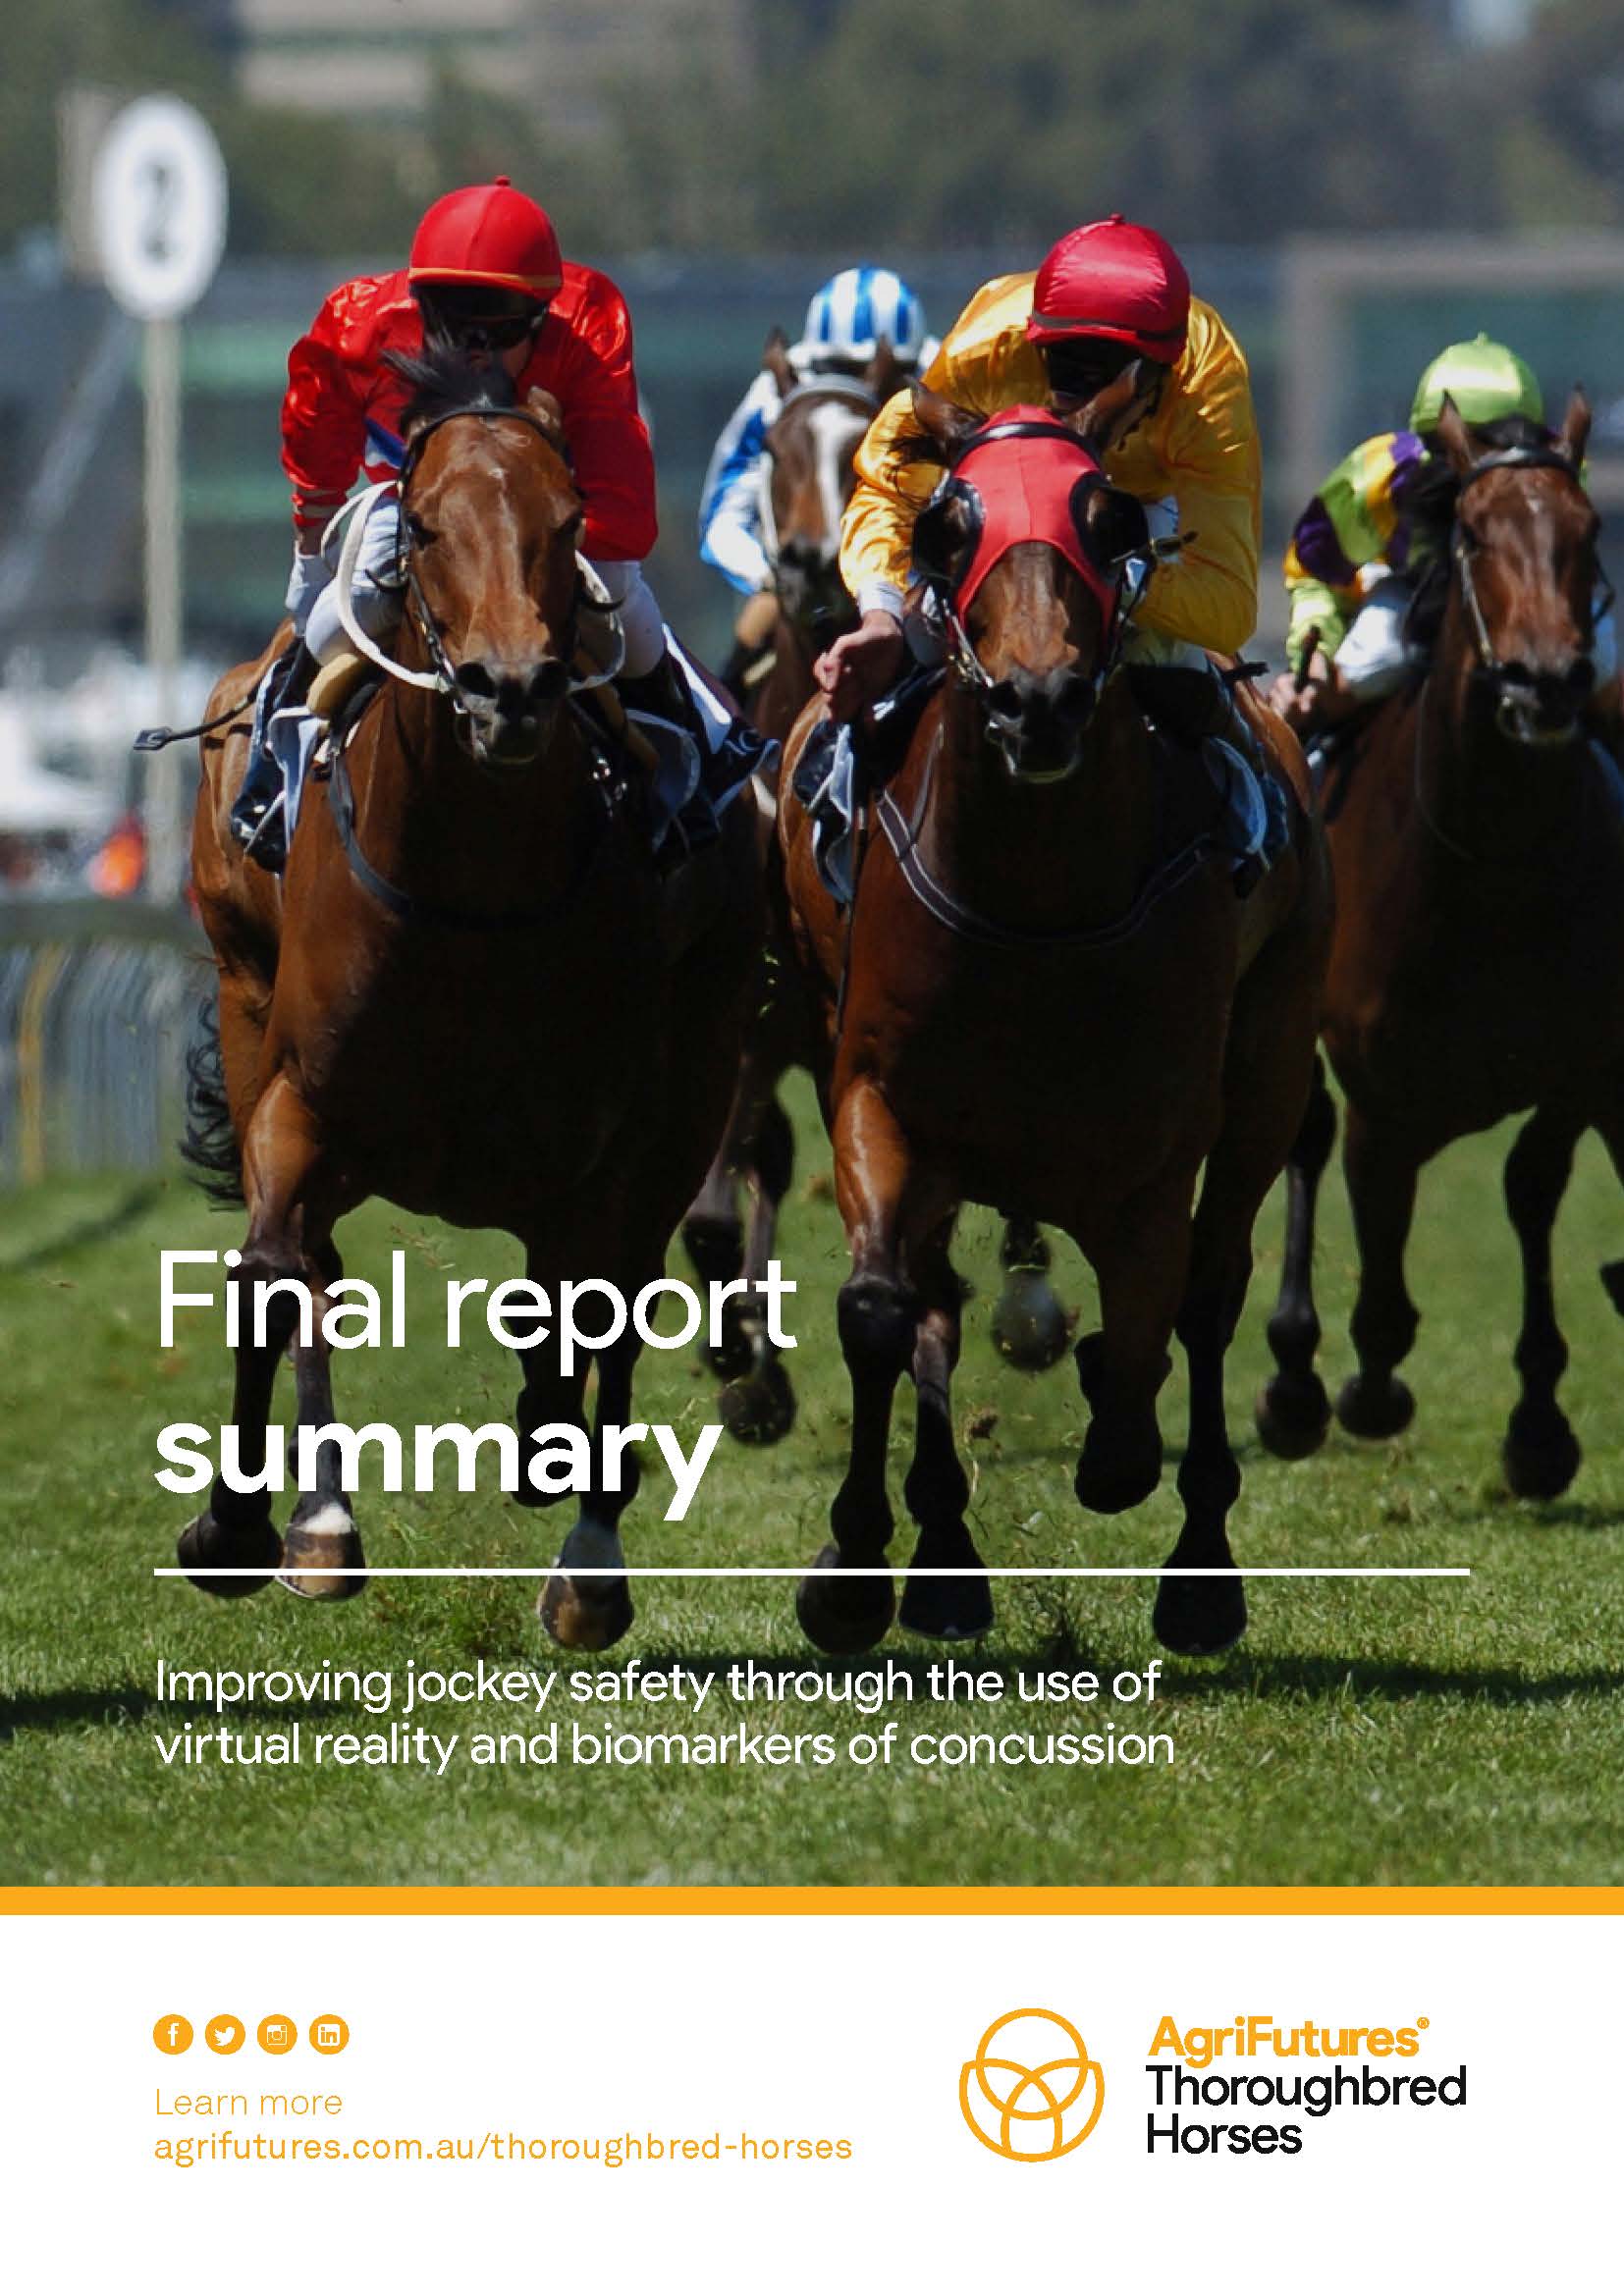 Final report summary: Improving jockey safety through the use of virtual reality and biomarkers of concussion - image